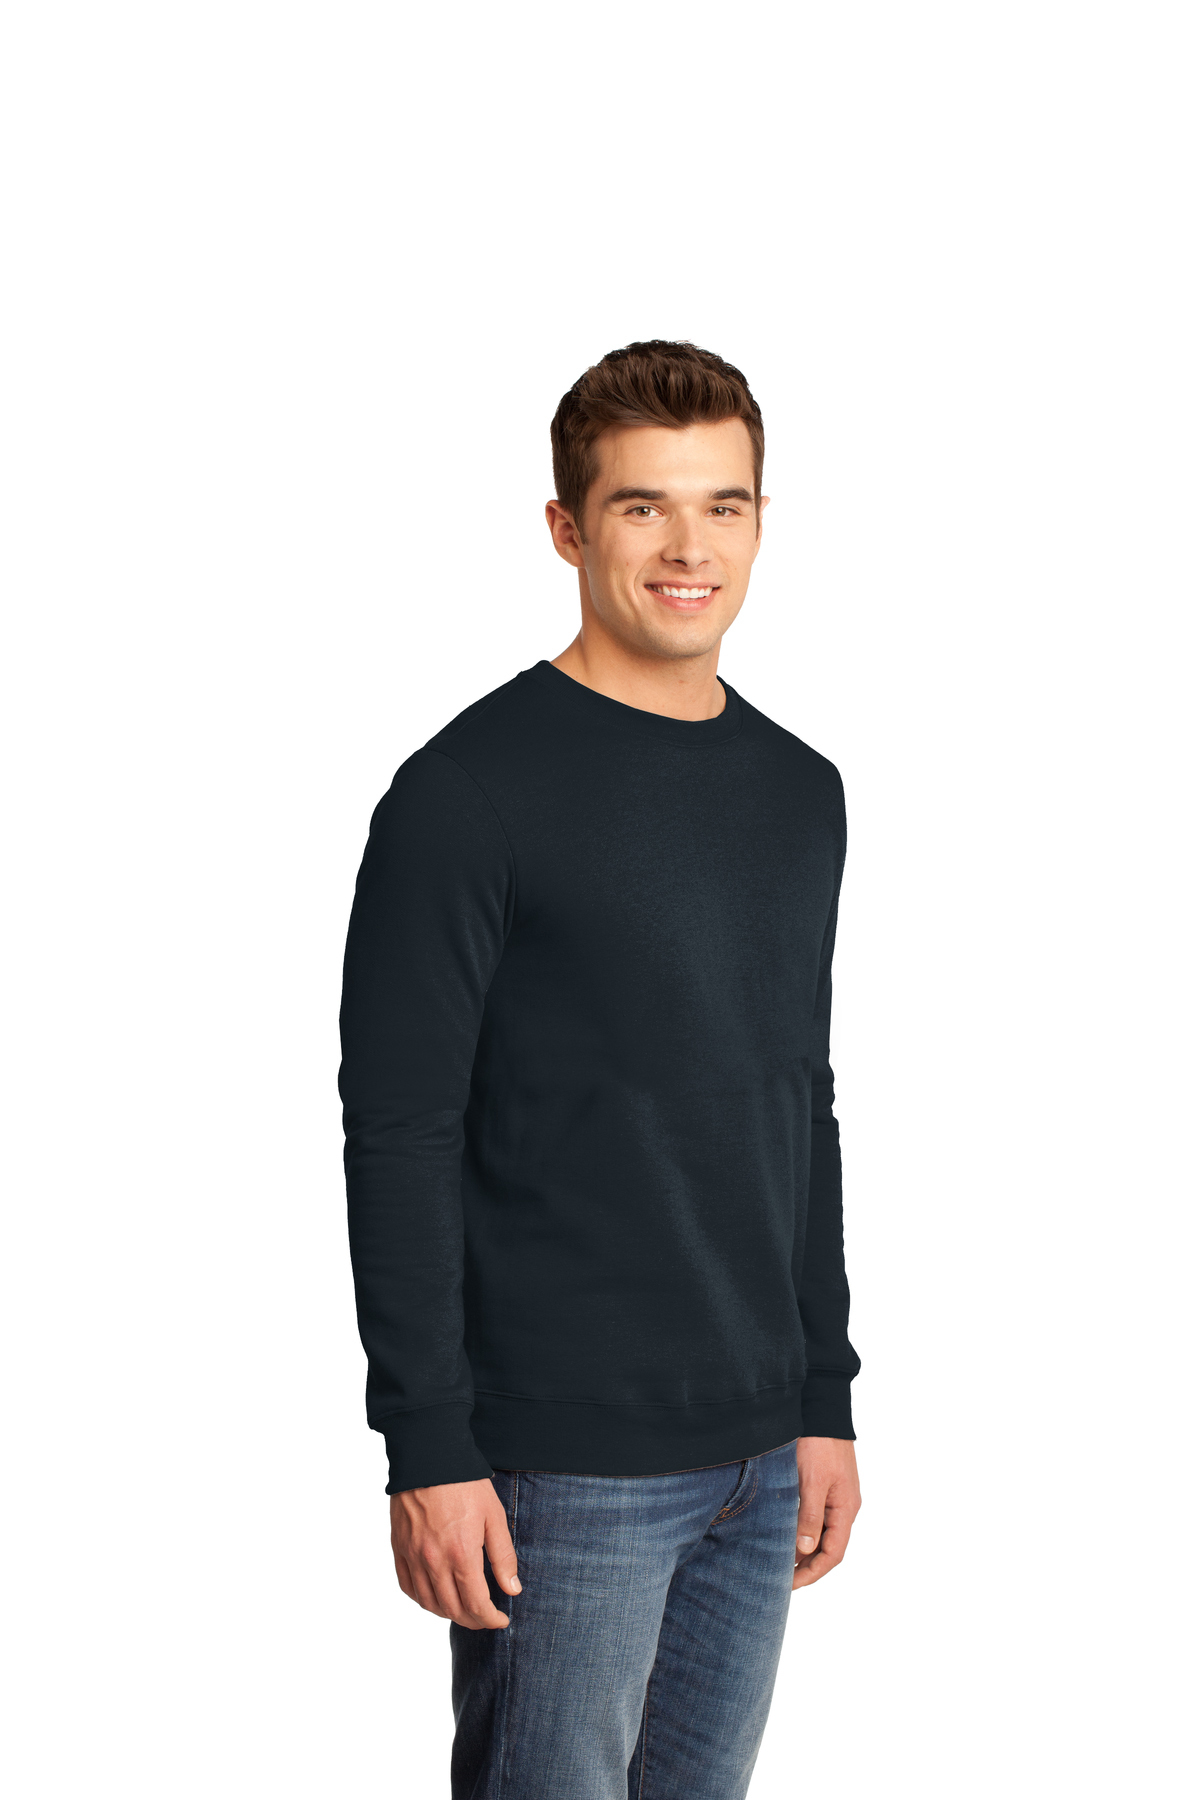 CLOSEOUT District - Young Mens The Concert Fleece™ Crew | Product | SanMar